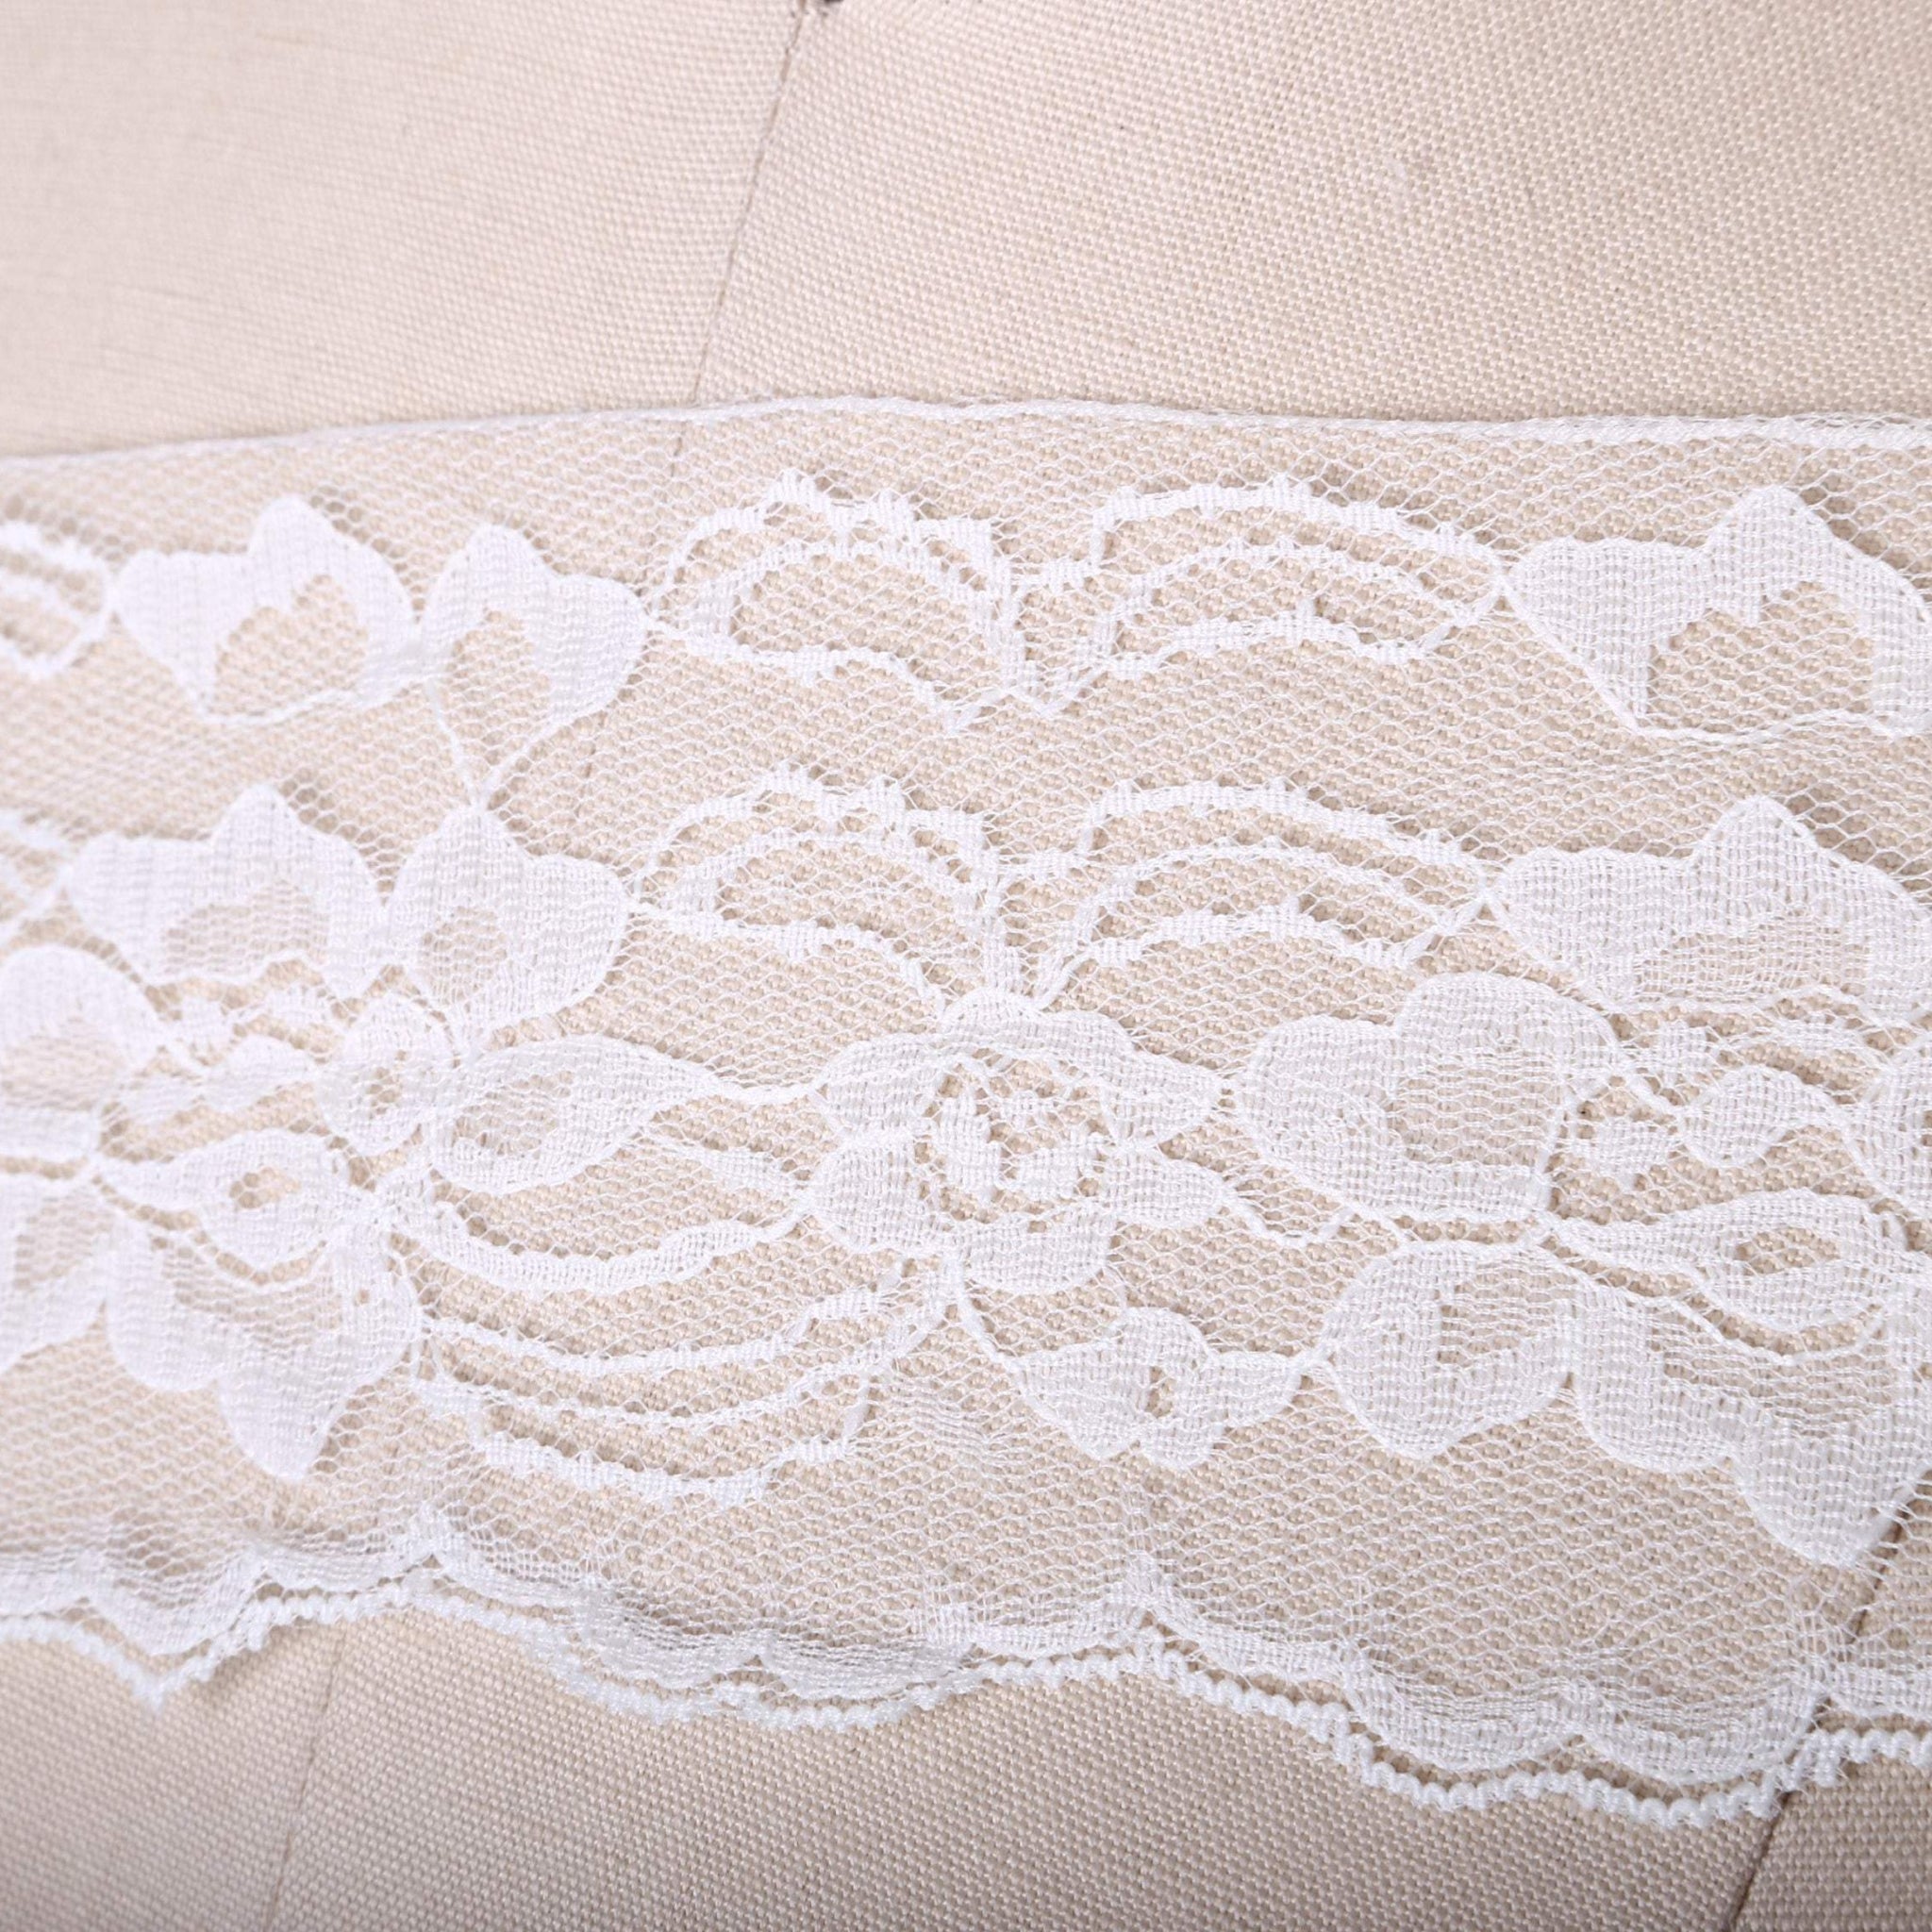 2 Yards Charming White Polyester Floral Lace Trim